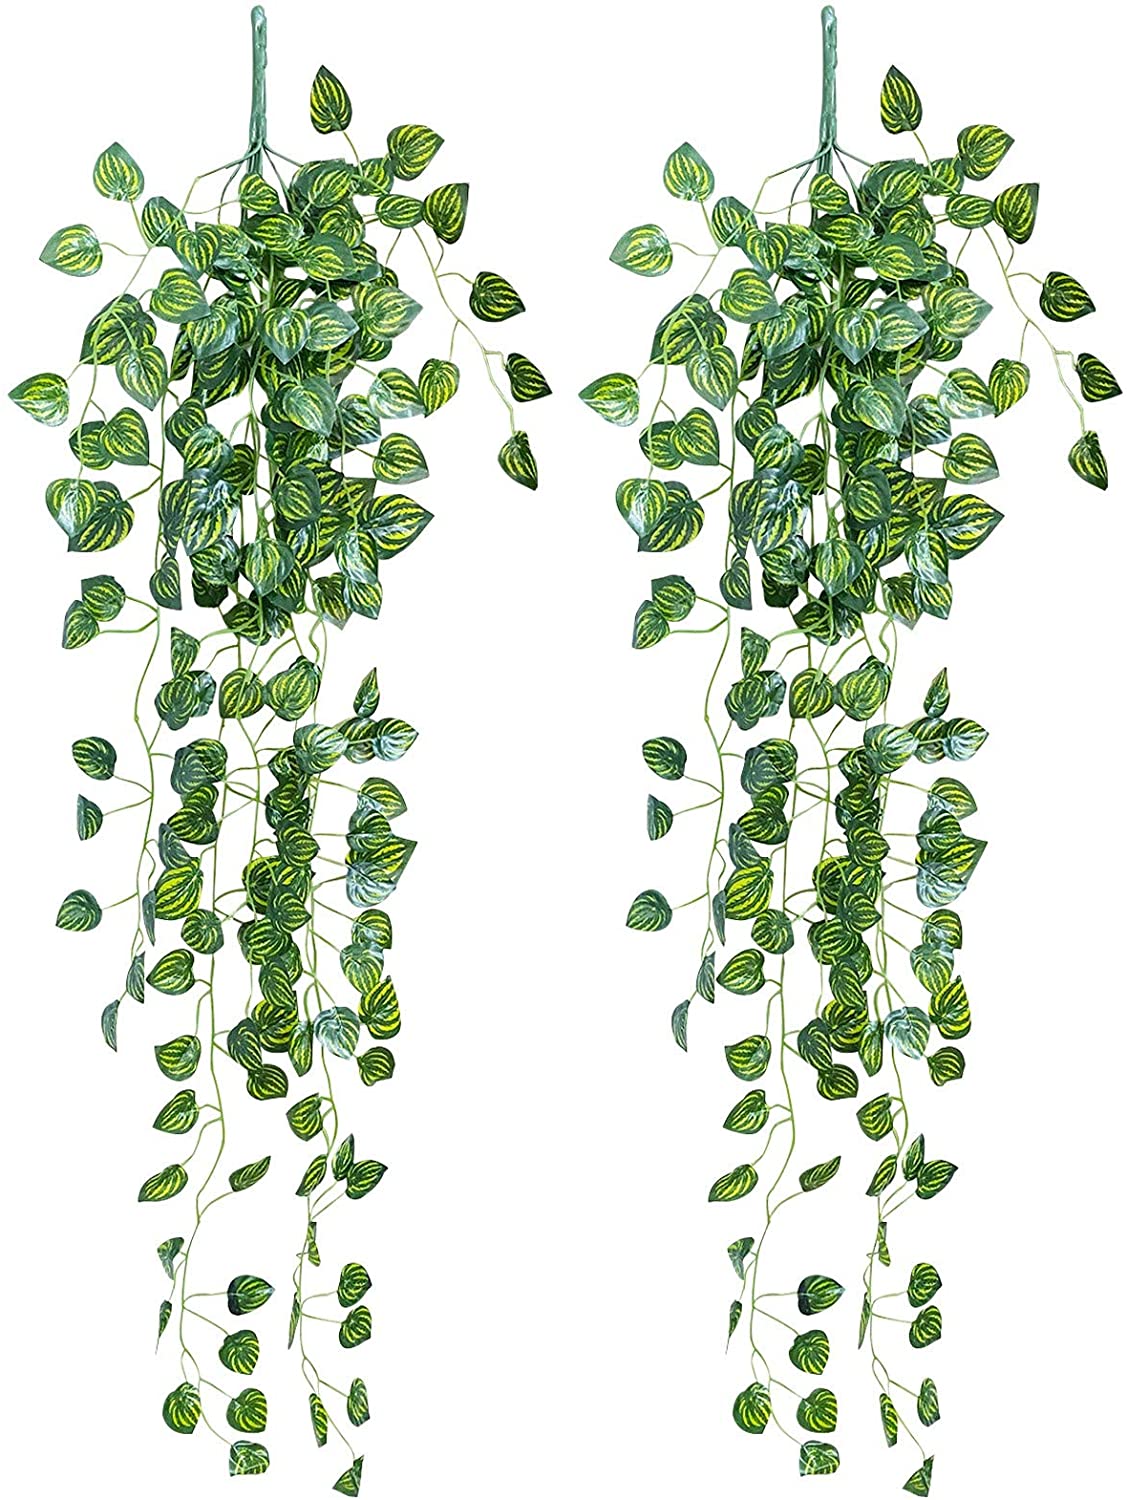 Artificial Plant Leaves Hanging Creeper (Set of 2, 100cm)